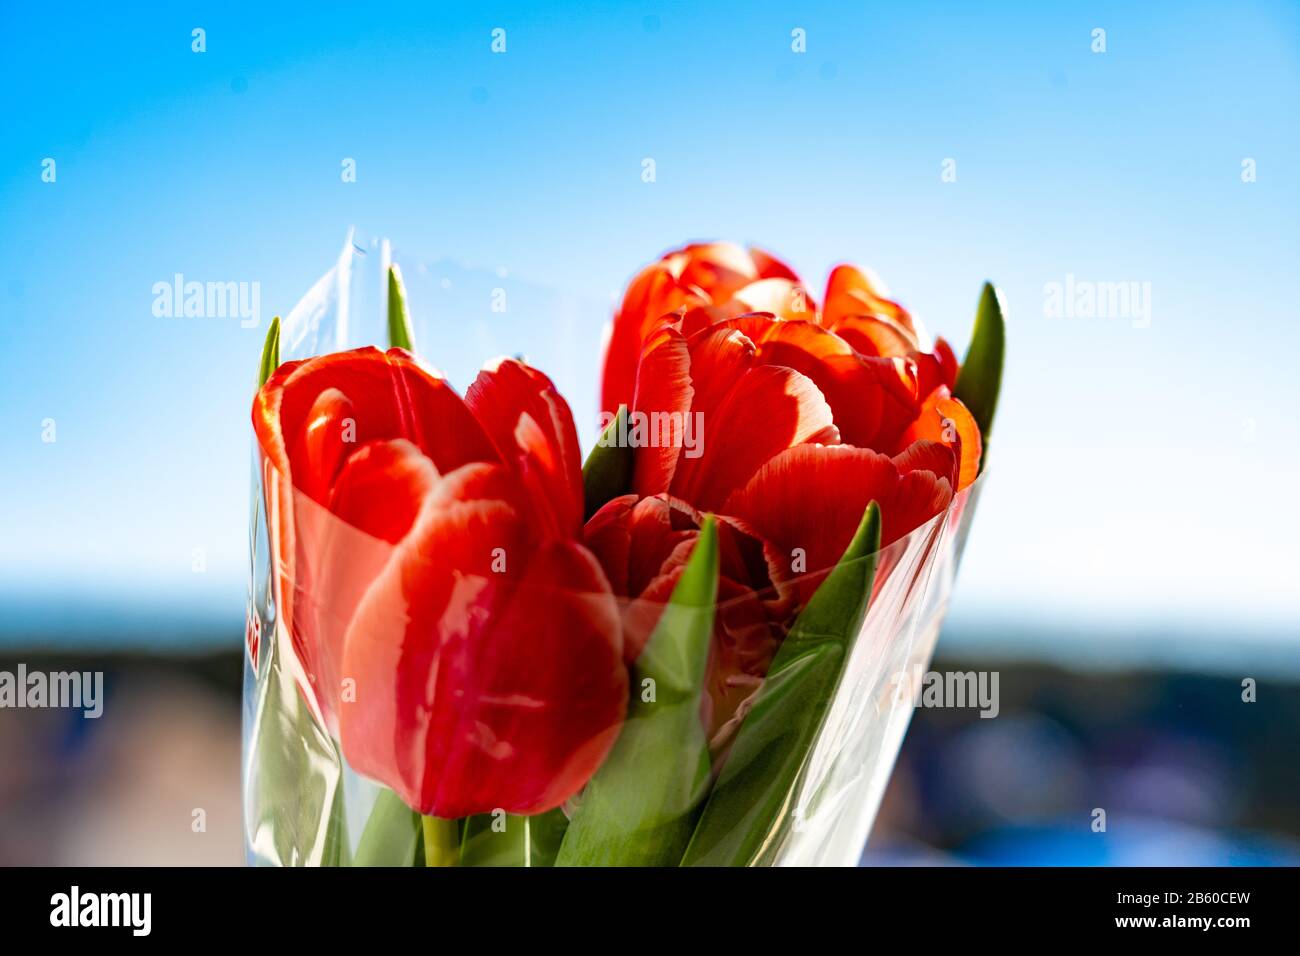 red tulip blooms standing tall against a blue sky Stock Photo